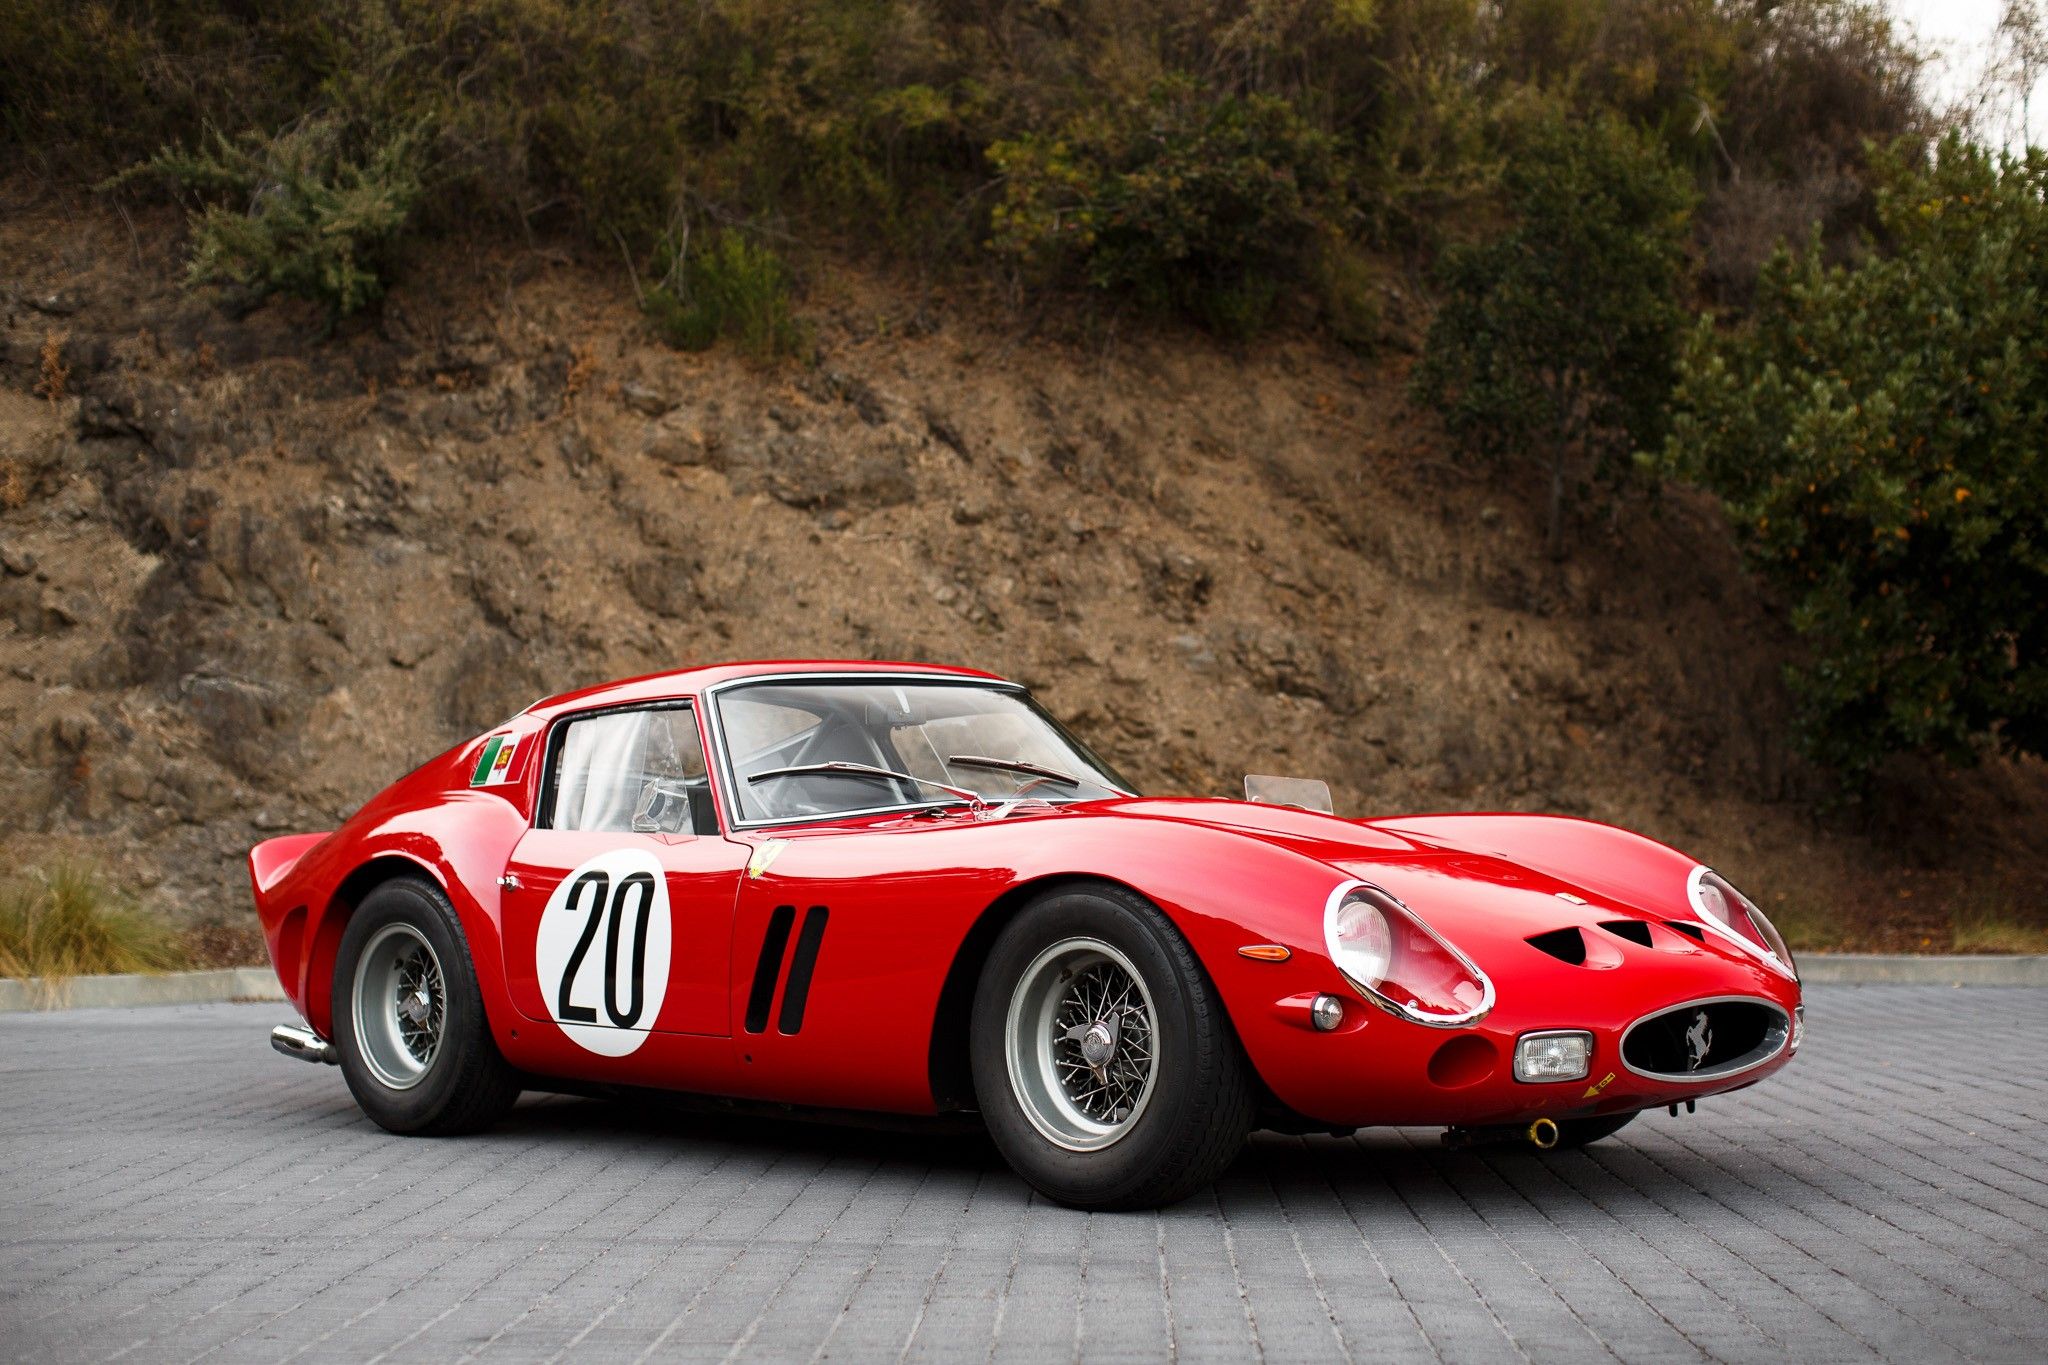 250 GTO made the Sports Car International’s list of Top Sports Cars of the 1960s